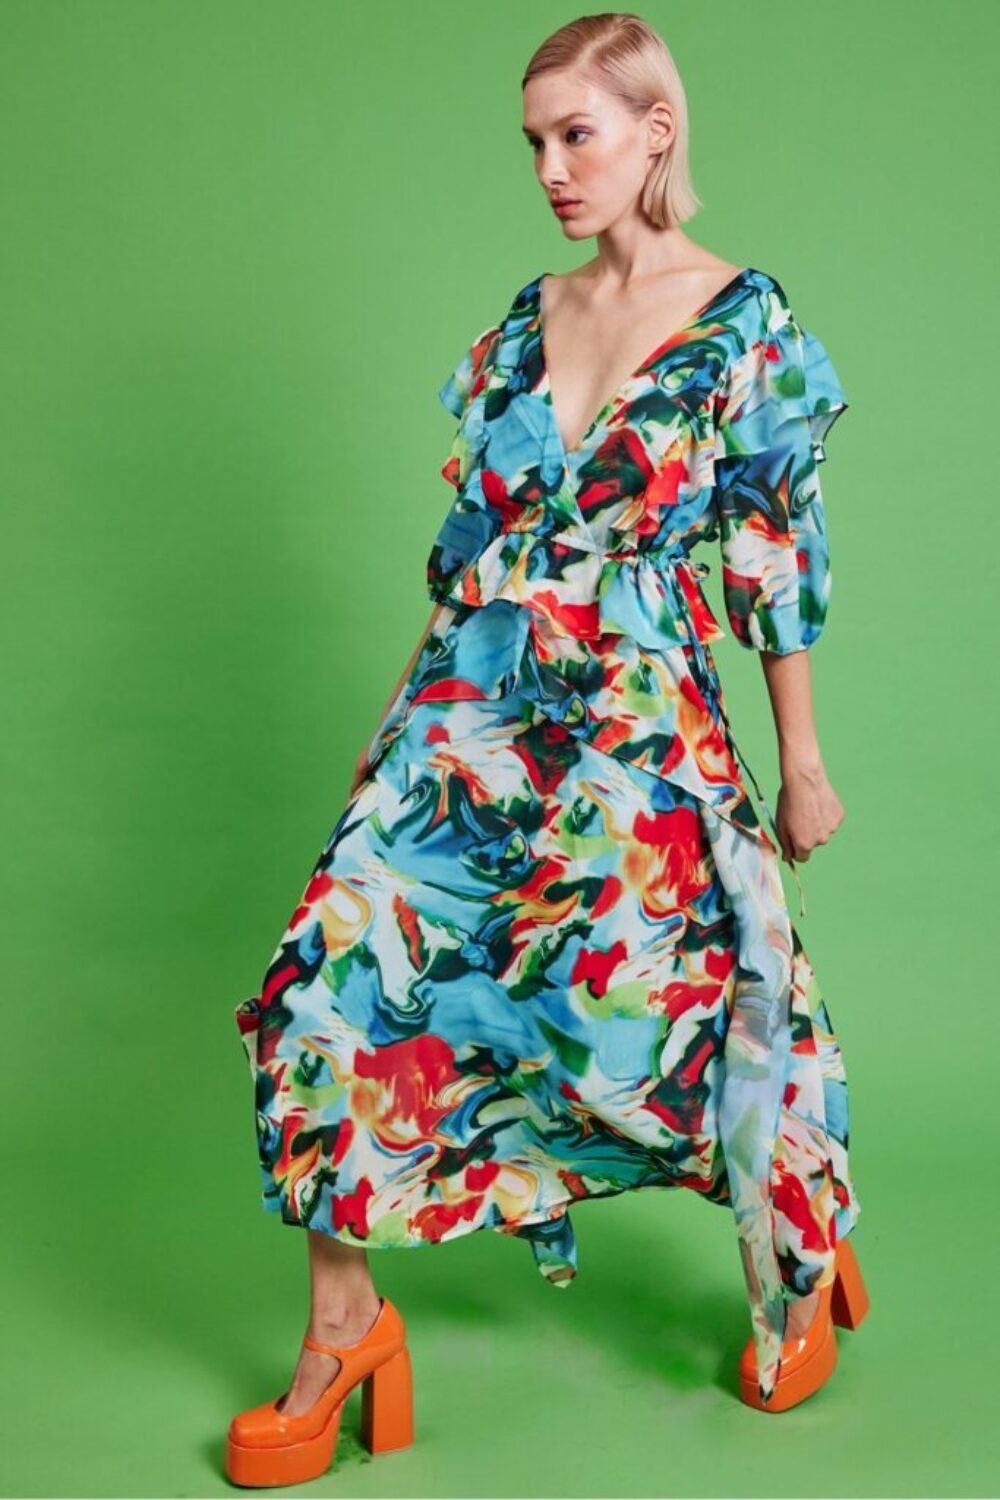 Shop Lux Tuscany Floral Maxi Dress and women's luxury and designer clothes at www.lux-apparel.co.uk